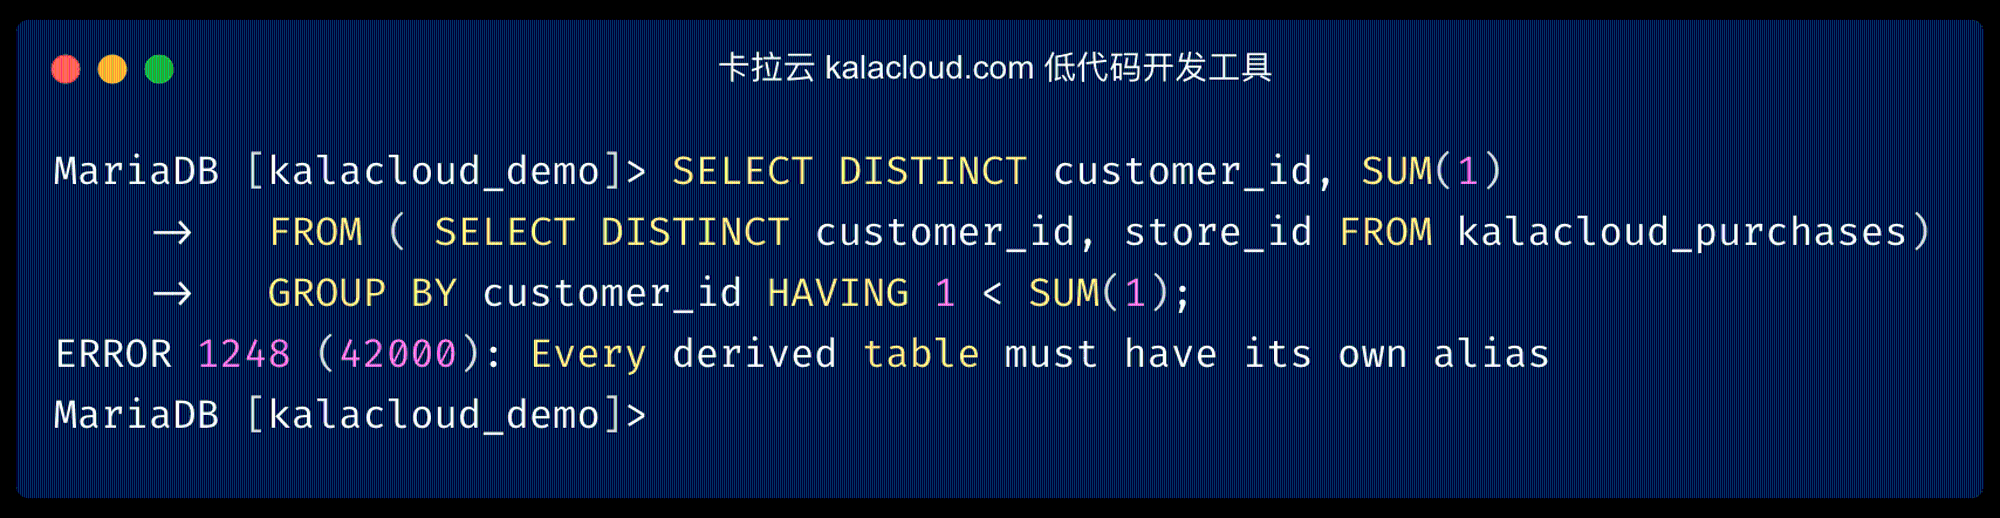 every-derived-table-must-have-its-own-alias 1248 错误